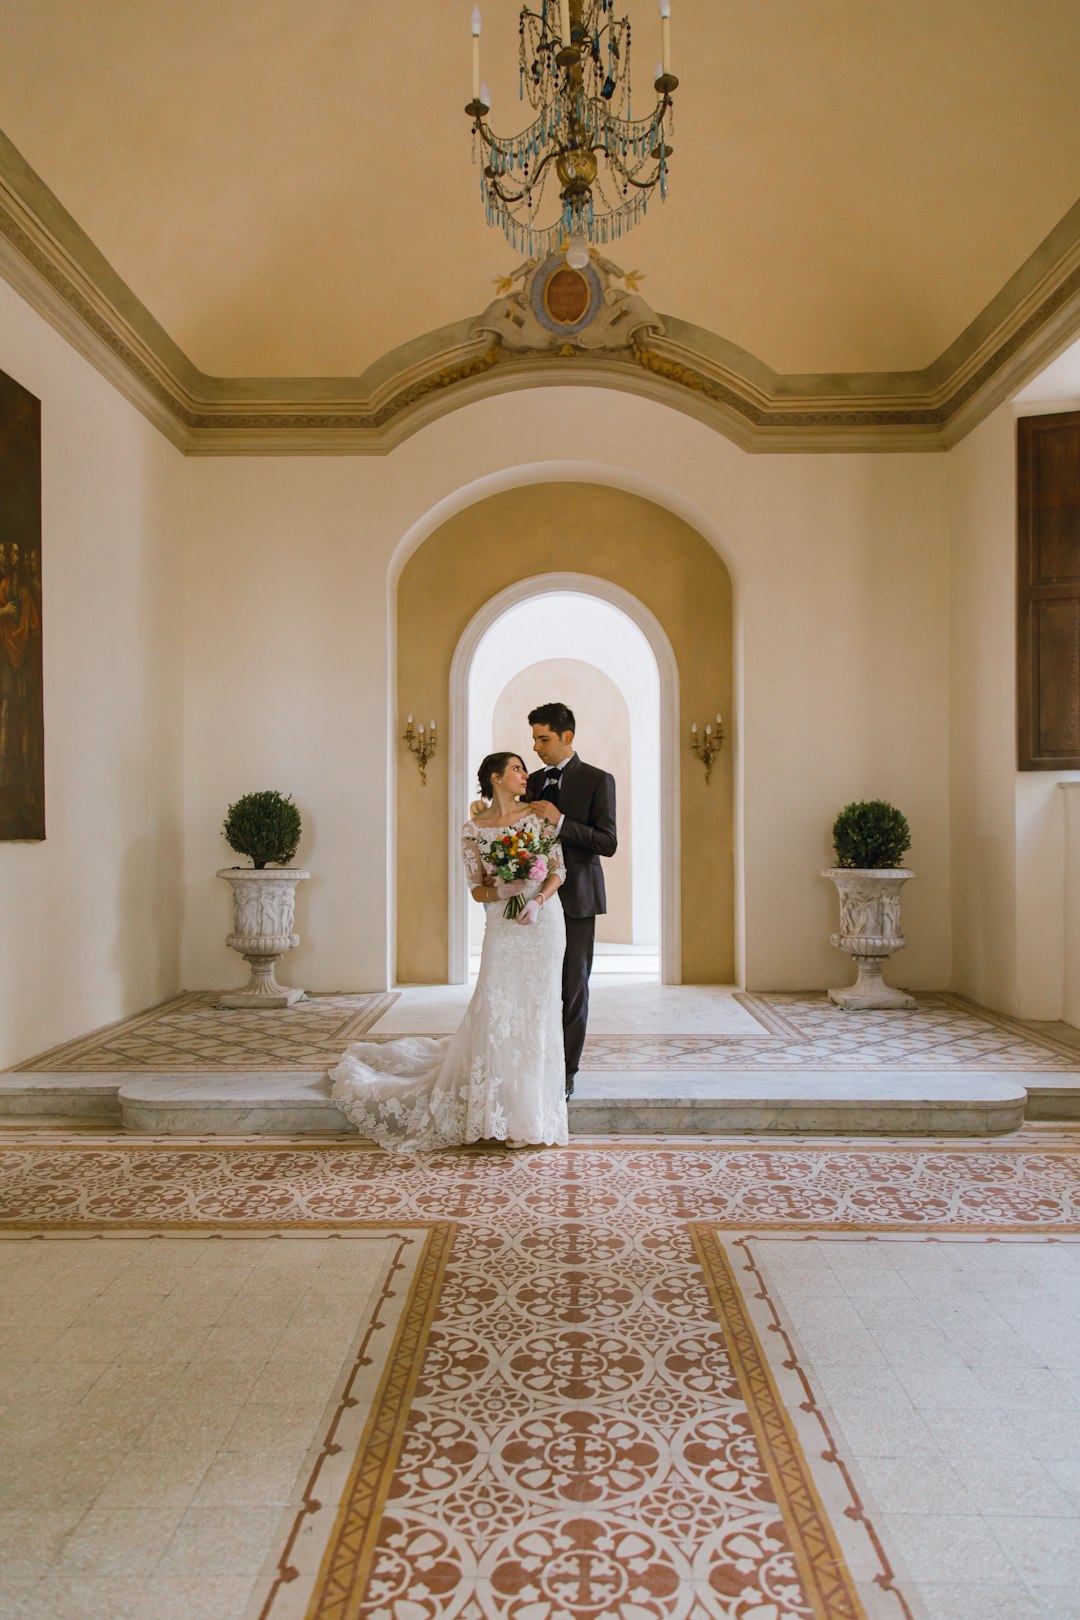 bride and groom standing on white and brown floral carpet